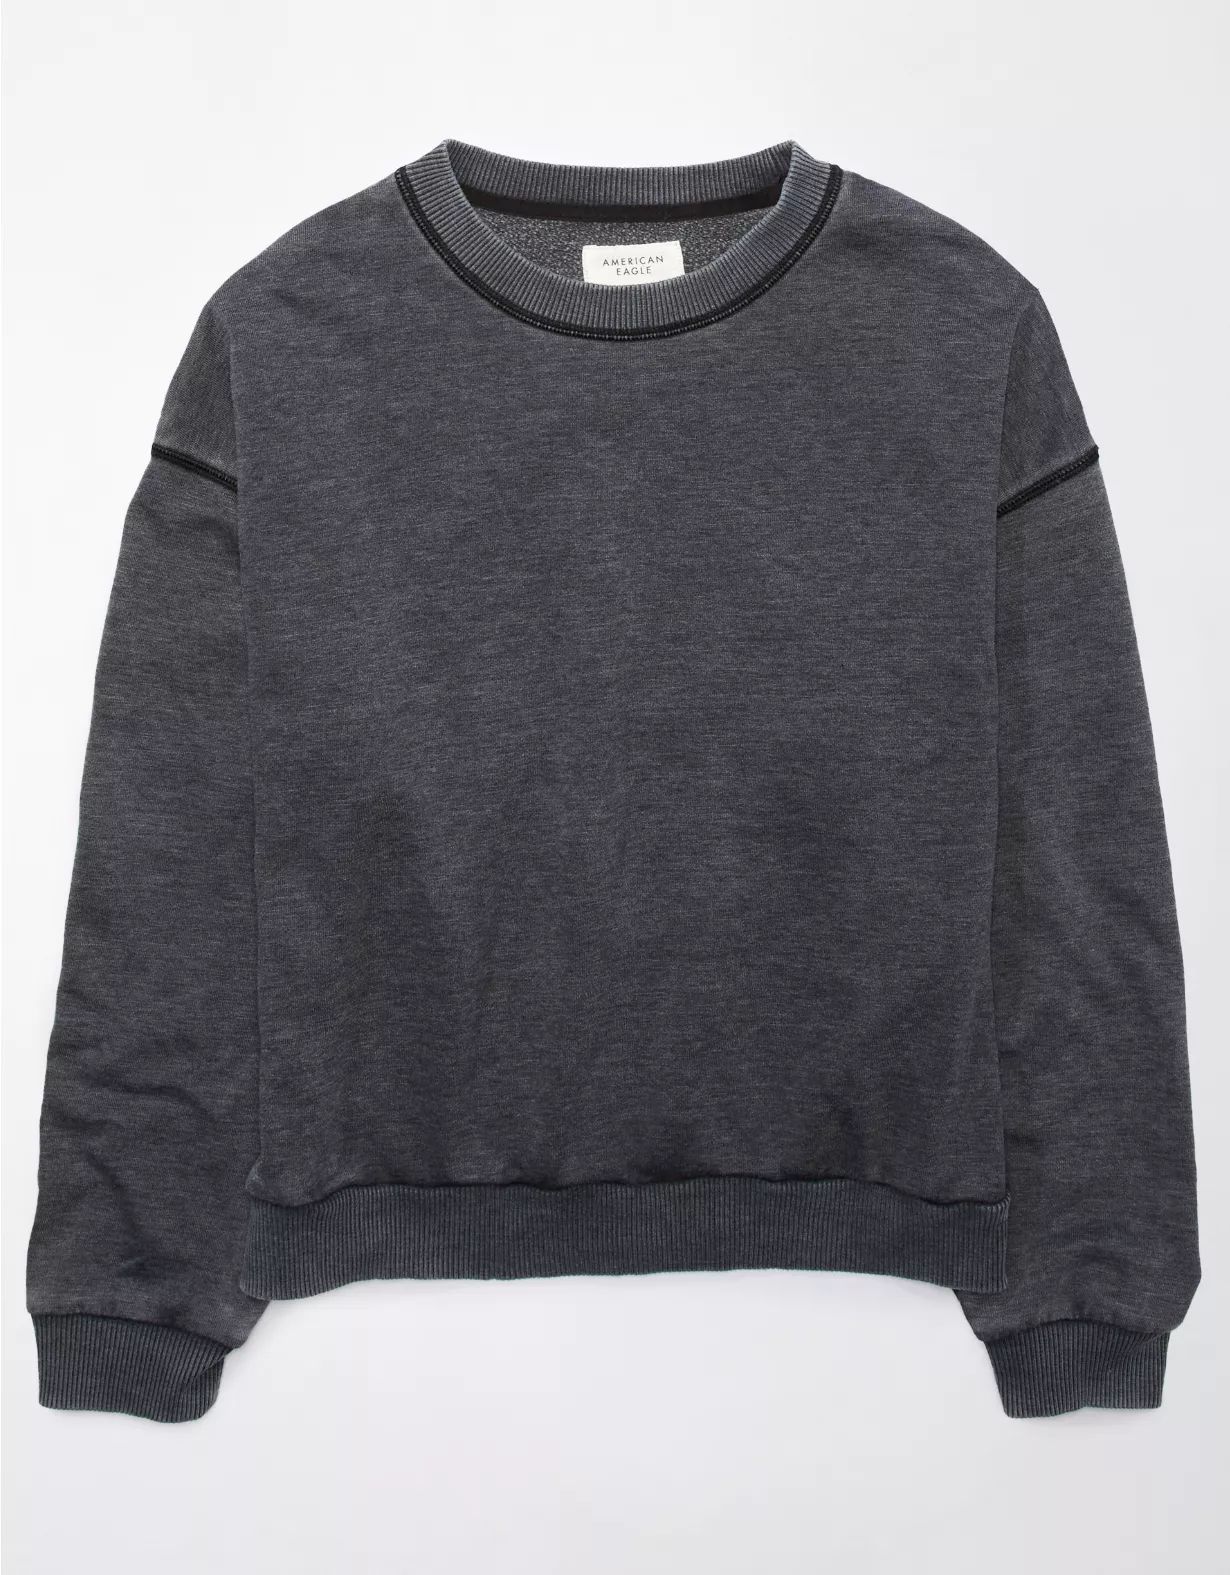 AE Funday Sweatshirt | American Eagle Outfitters (US & CA)